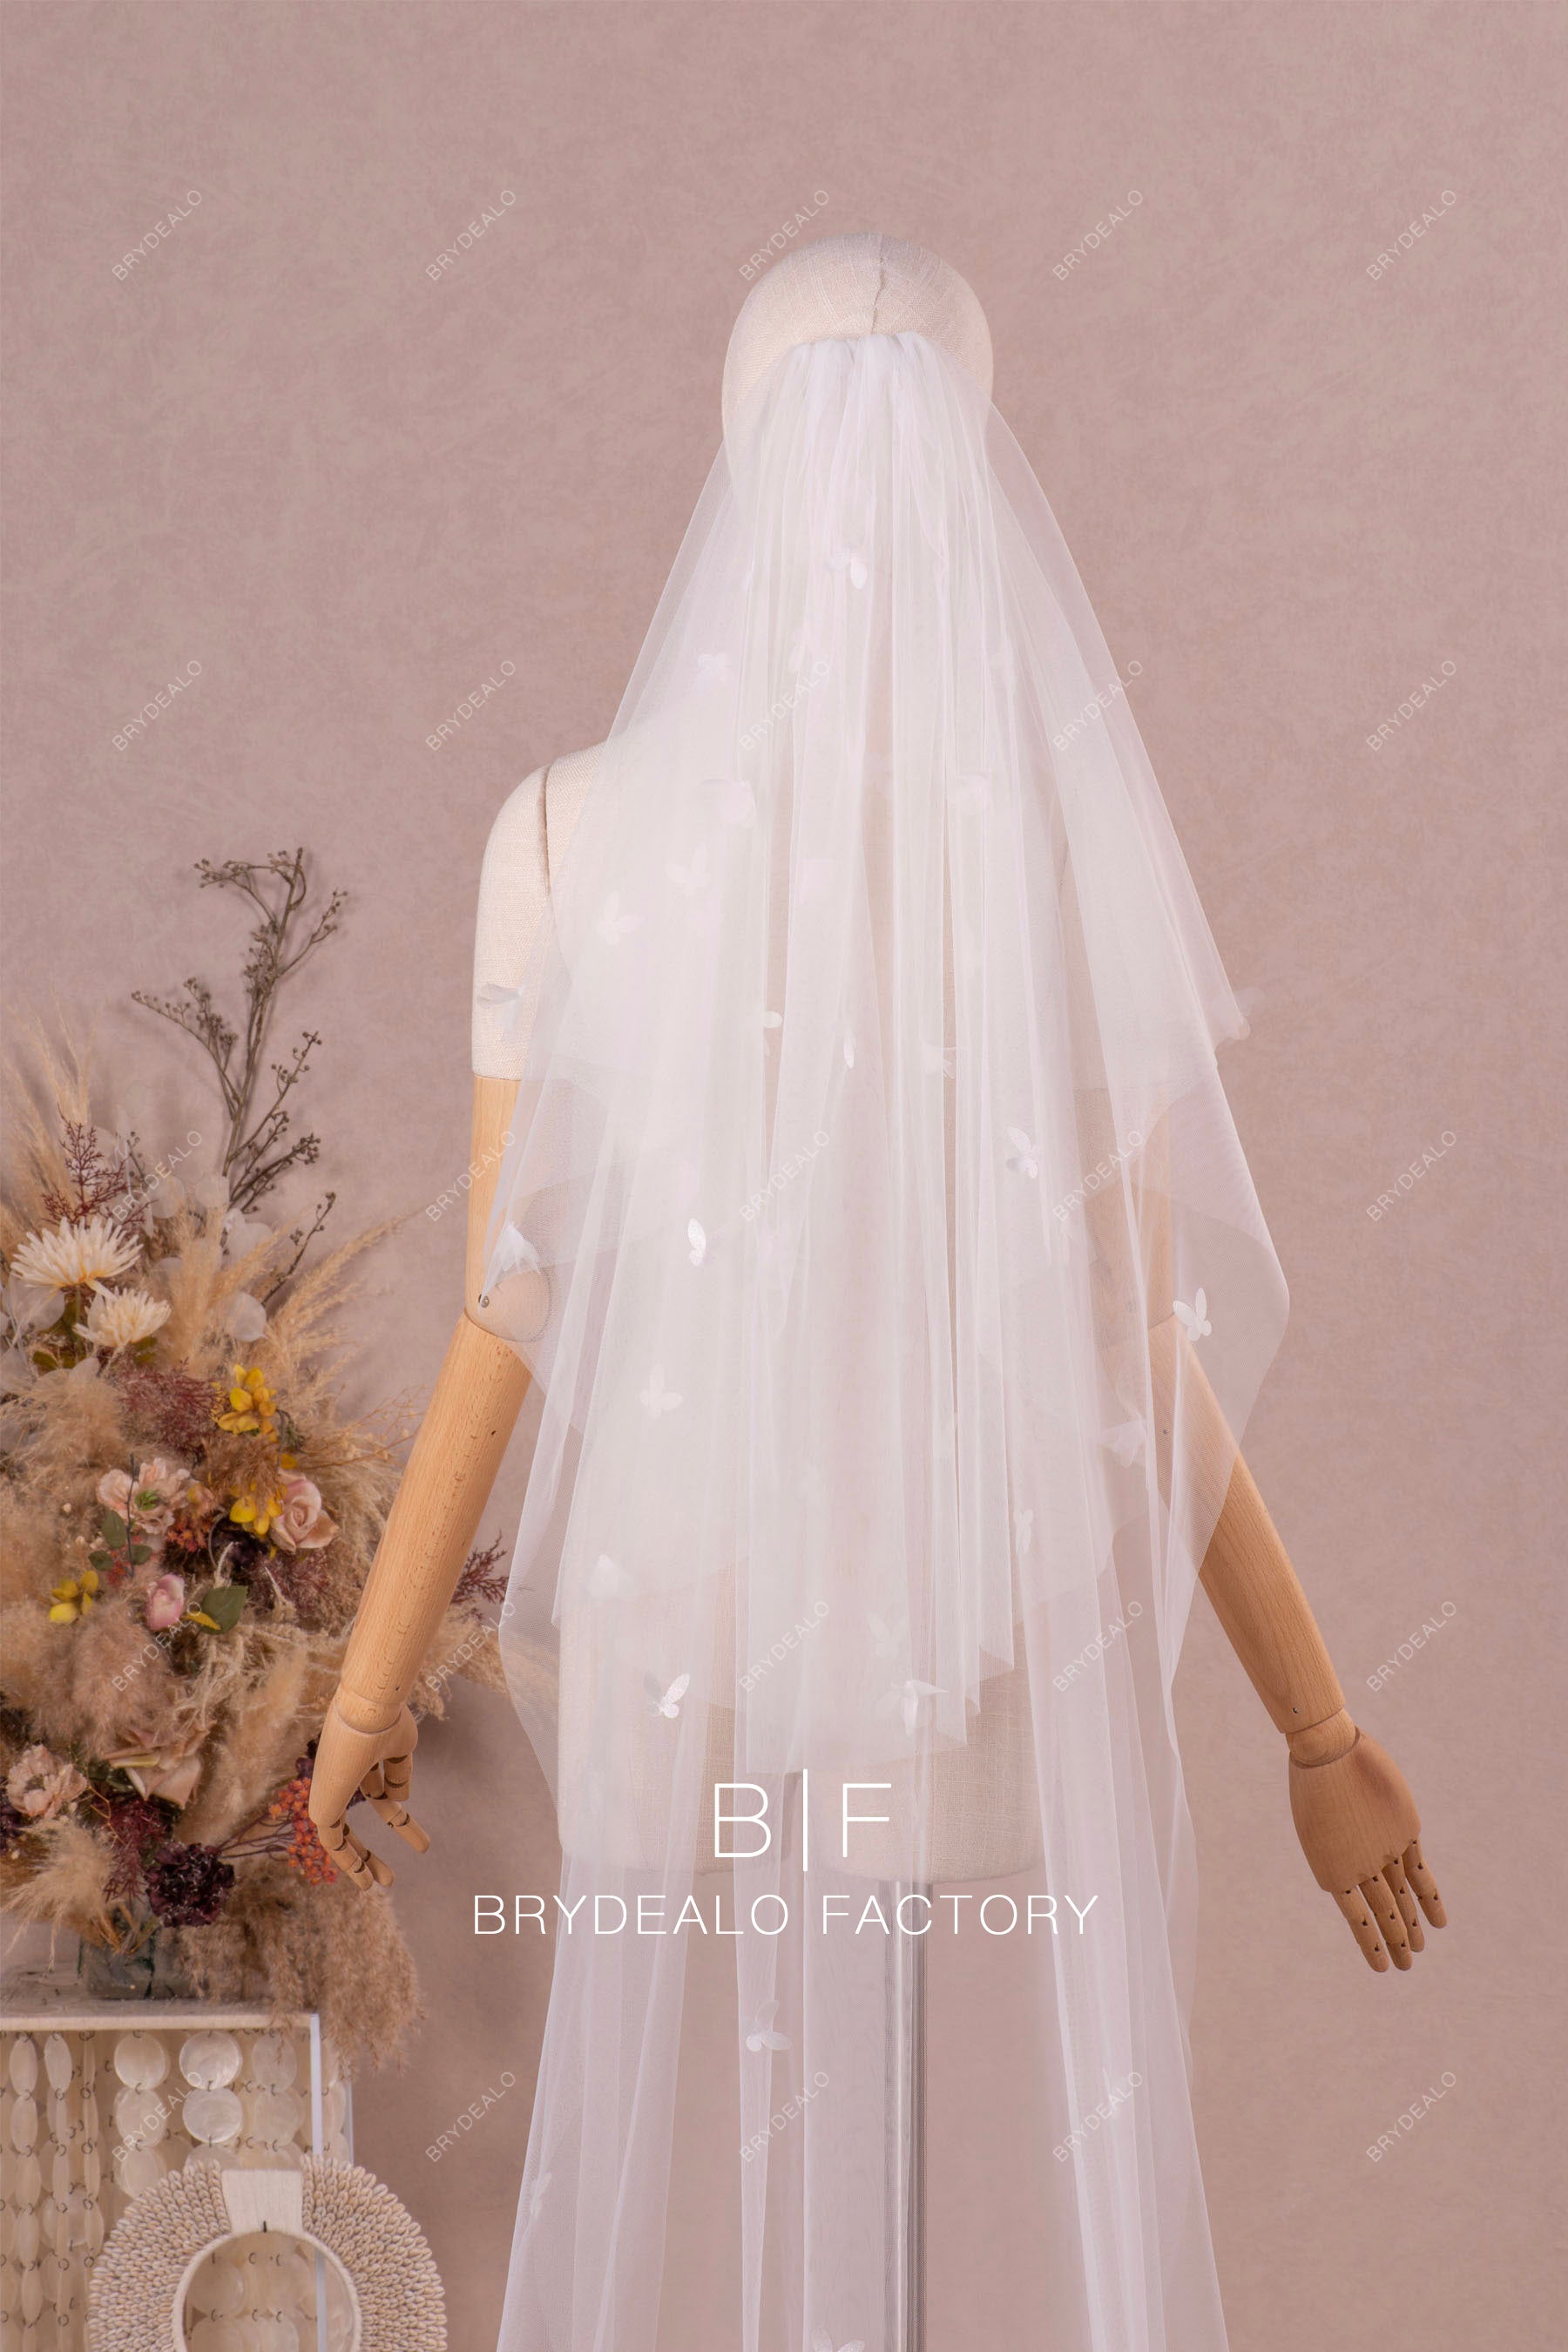 butterfly floral lace bridal veil